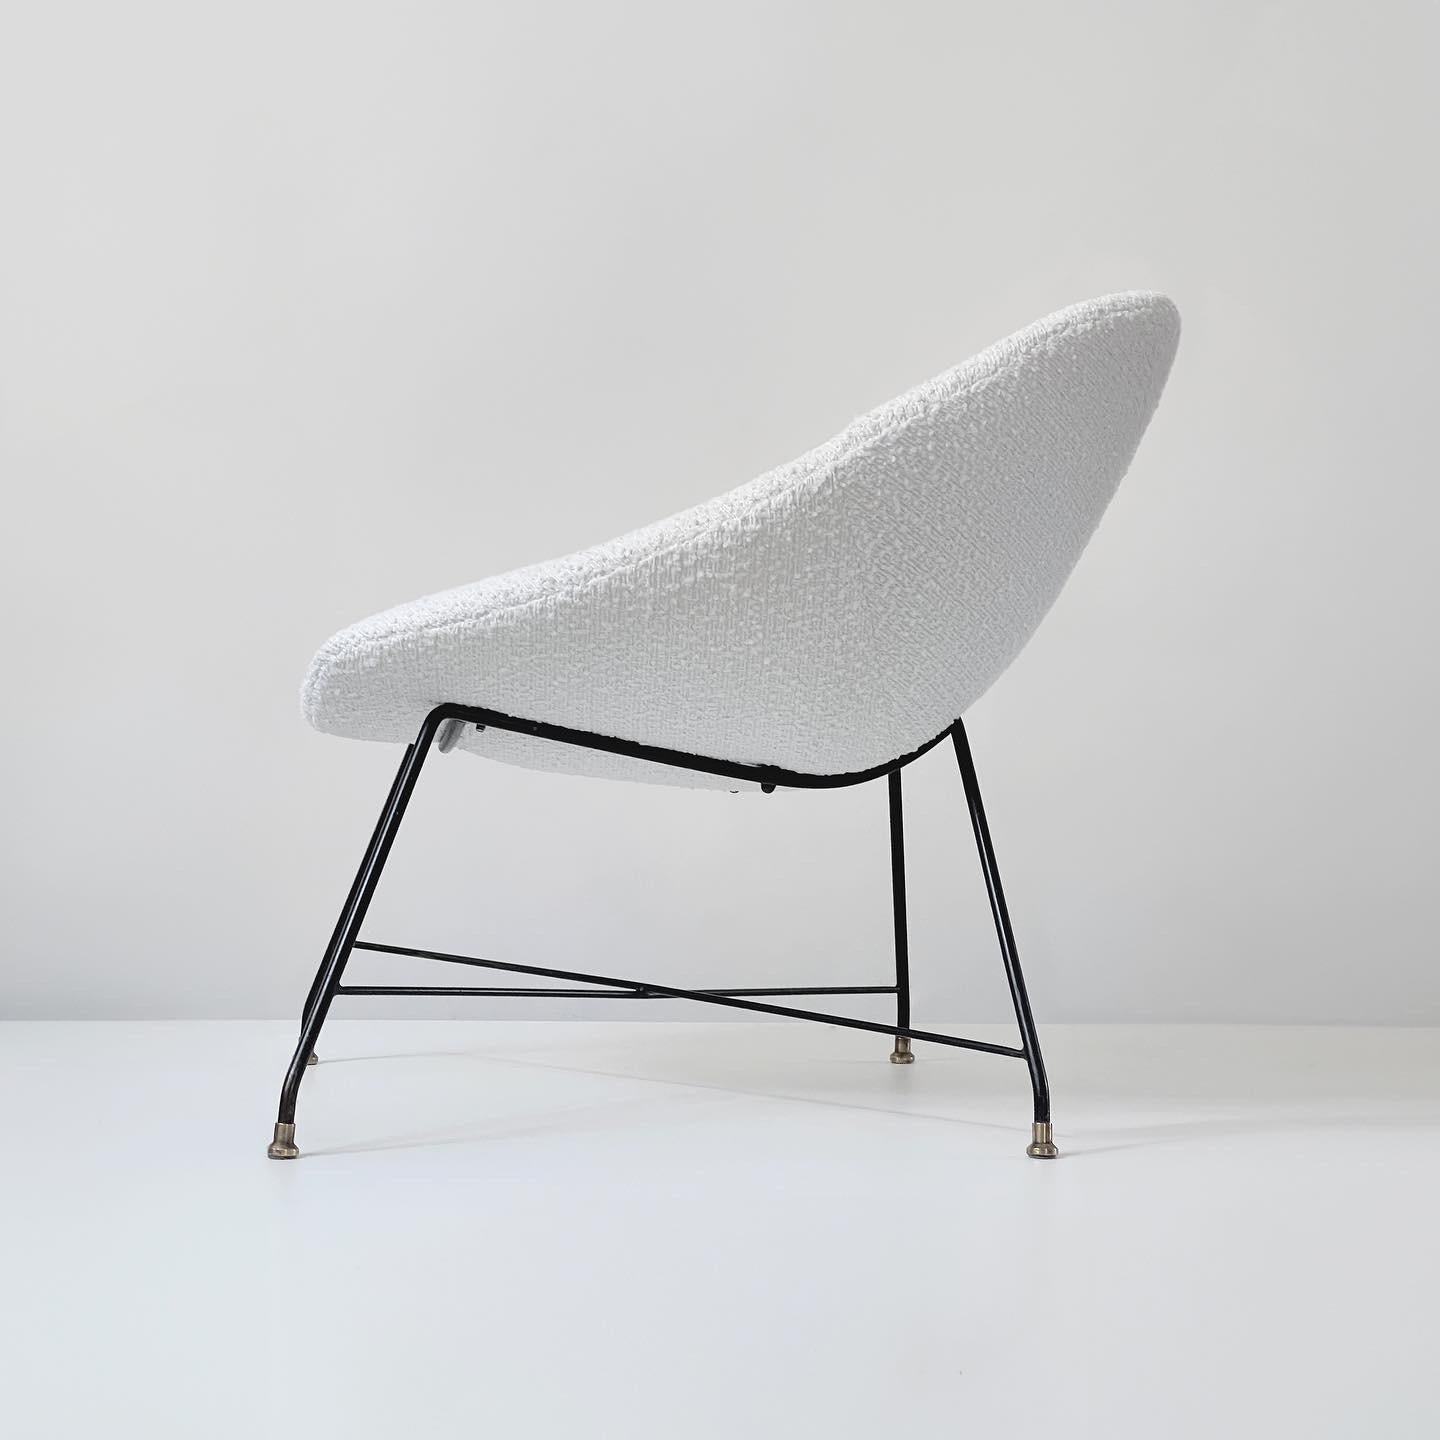 The Minoletta chair, a masterpiece designed by Augusto Bozzi for Saporiti, is an epitome of elegance and comfort. Originally crafted with exquisite attention to detail, it features a sleek design with clean lines and impeccable craftsmanship. The